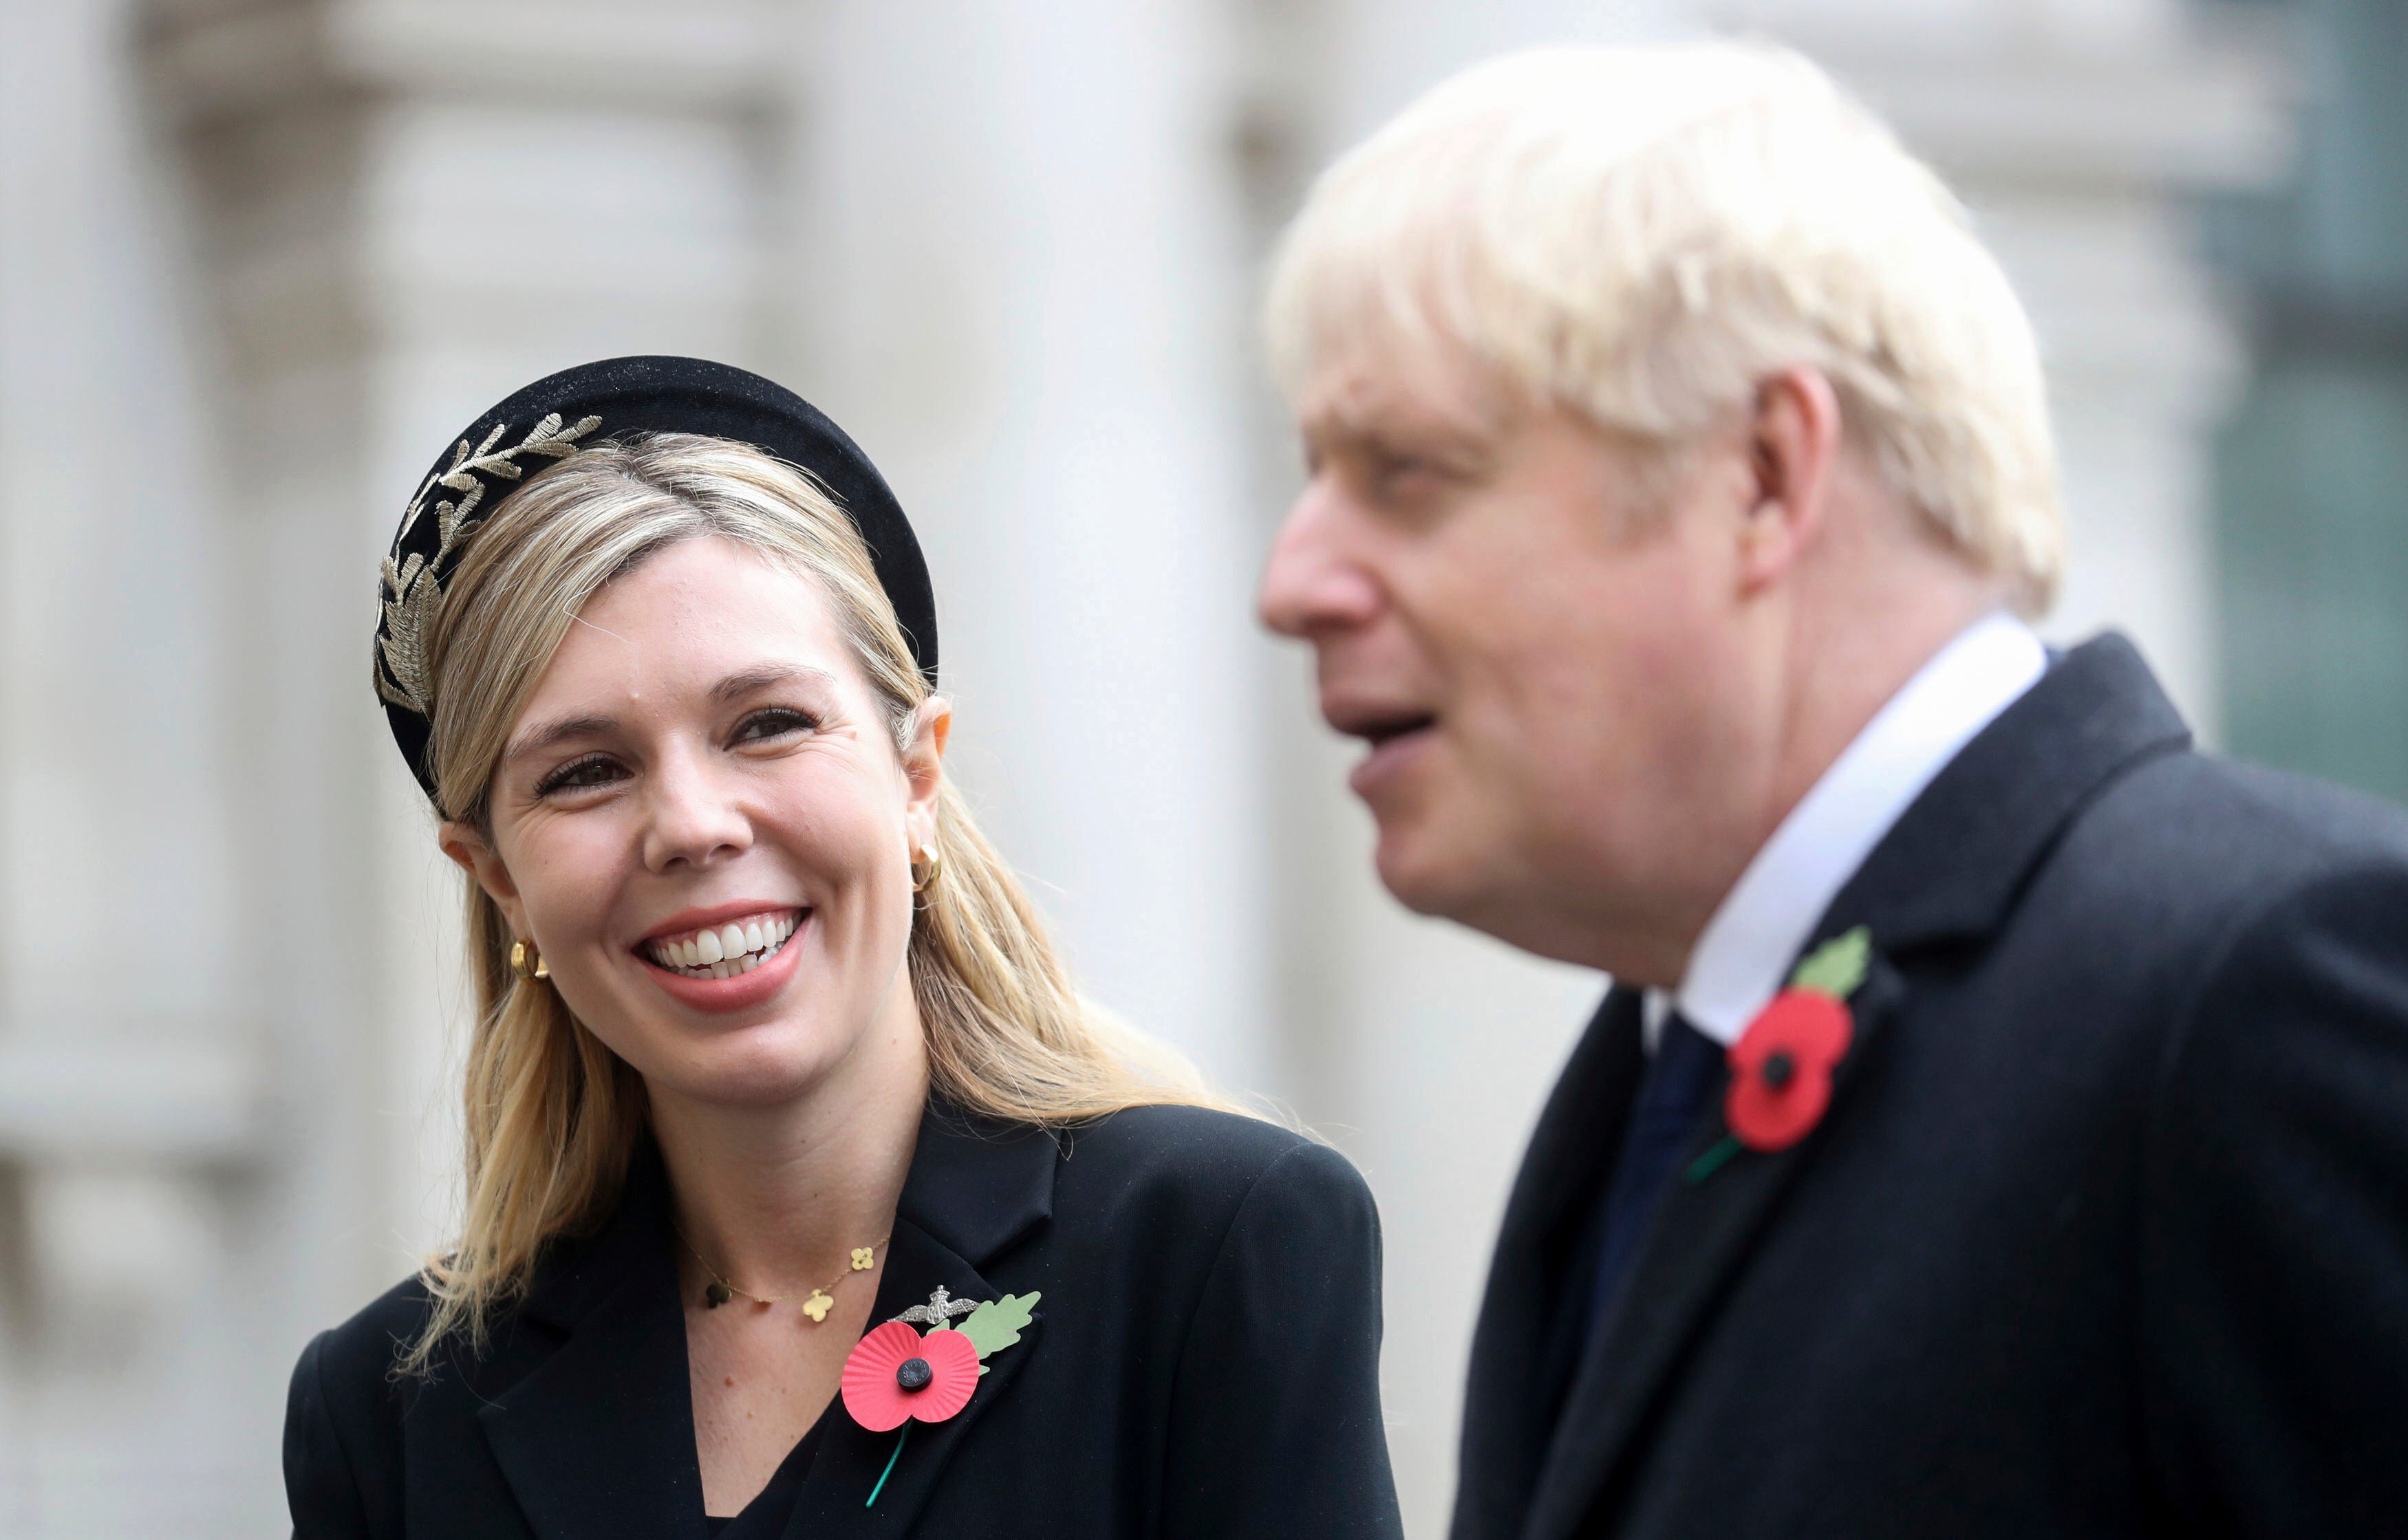 Boris Johnson and his fiancée Carrie Symonds attend the Remembrance service at the Cenotaph on Sunday